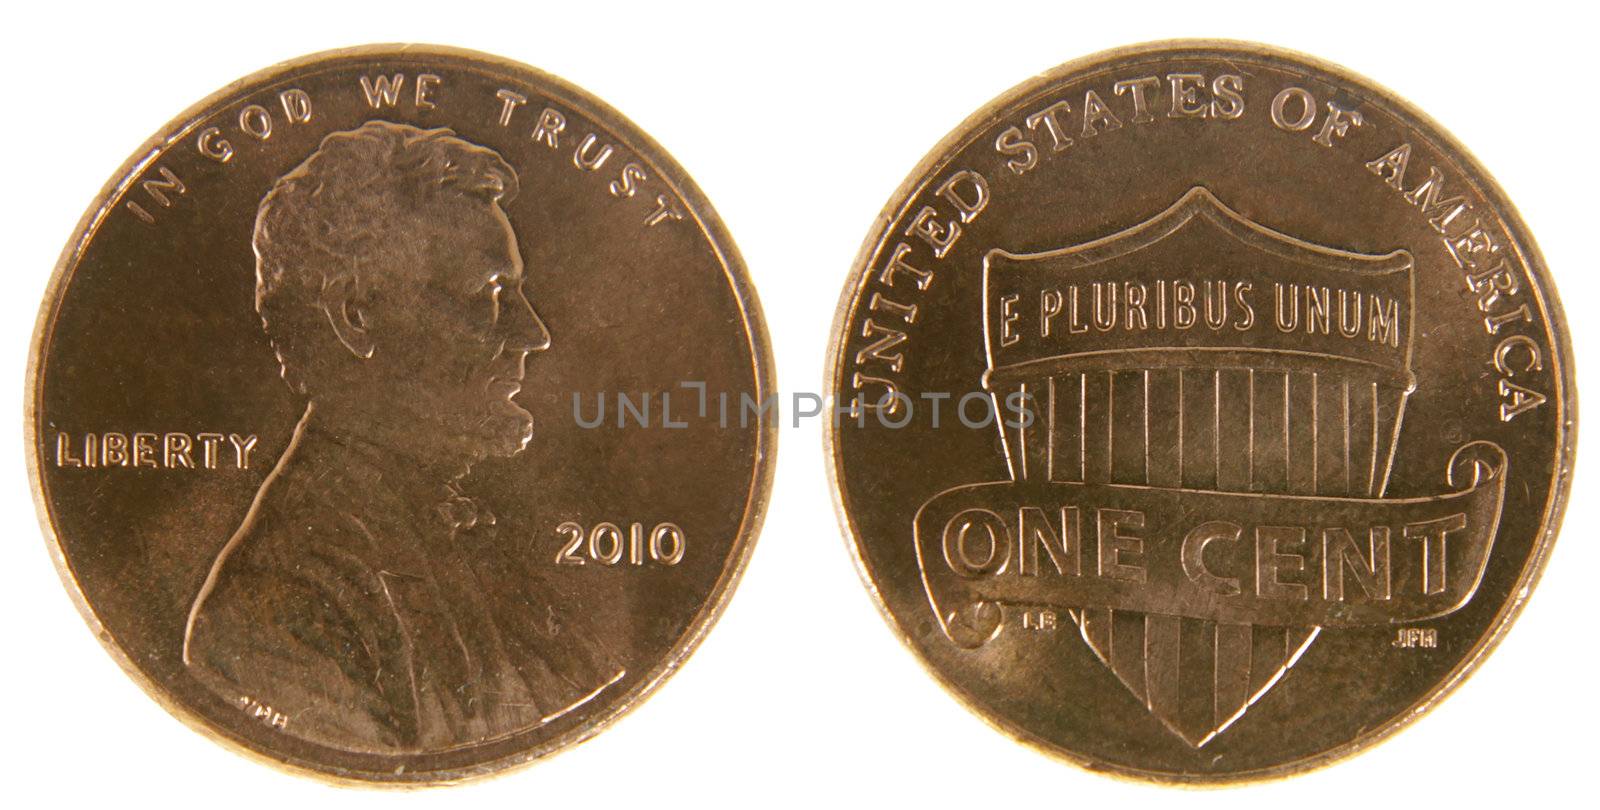 Both sides of a (2010) US penny, isolated on a white background.
